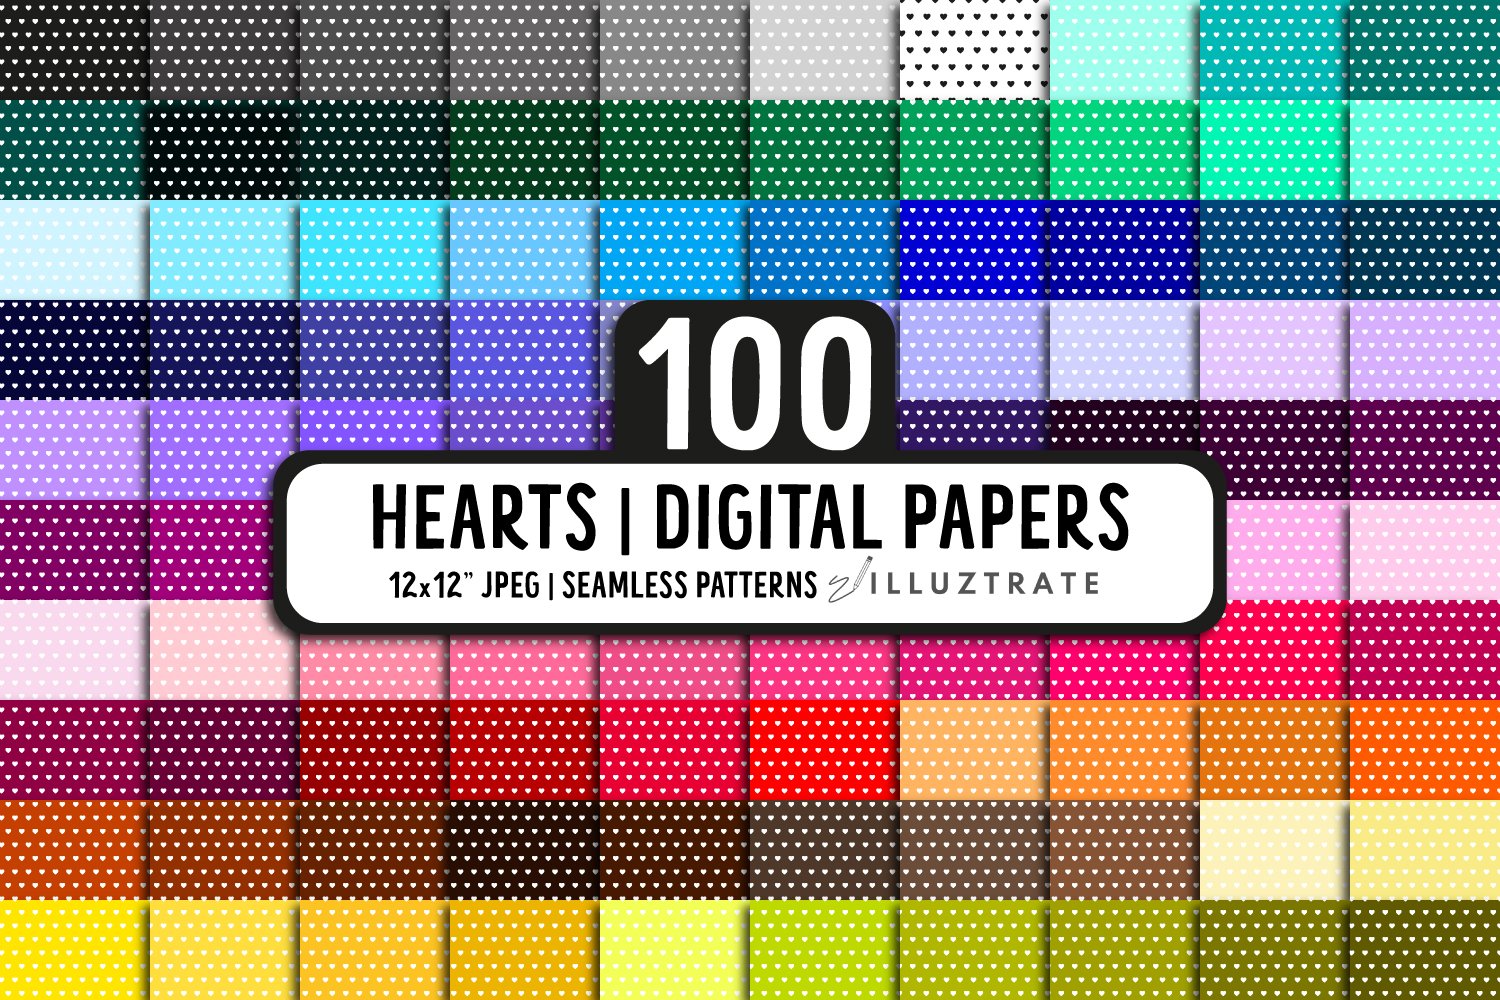 Hearts Digital Paper | Rainbow Paper cover image.